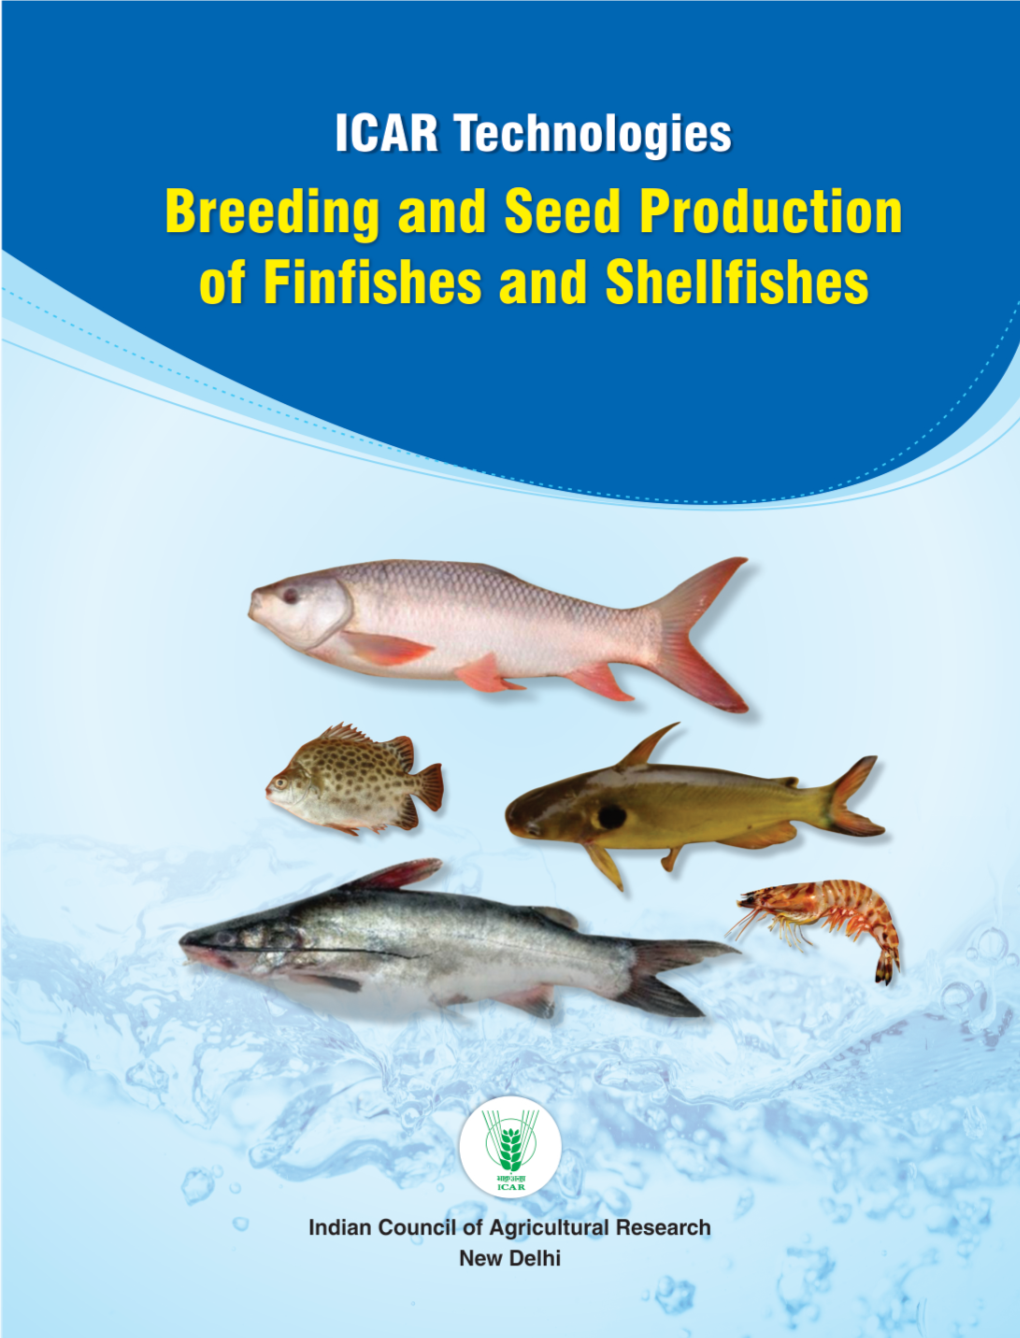 Breeding and Seed Production of Finfishes and Shellfishes